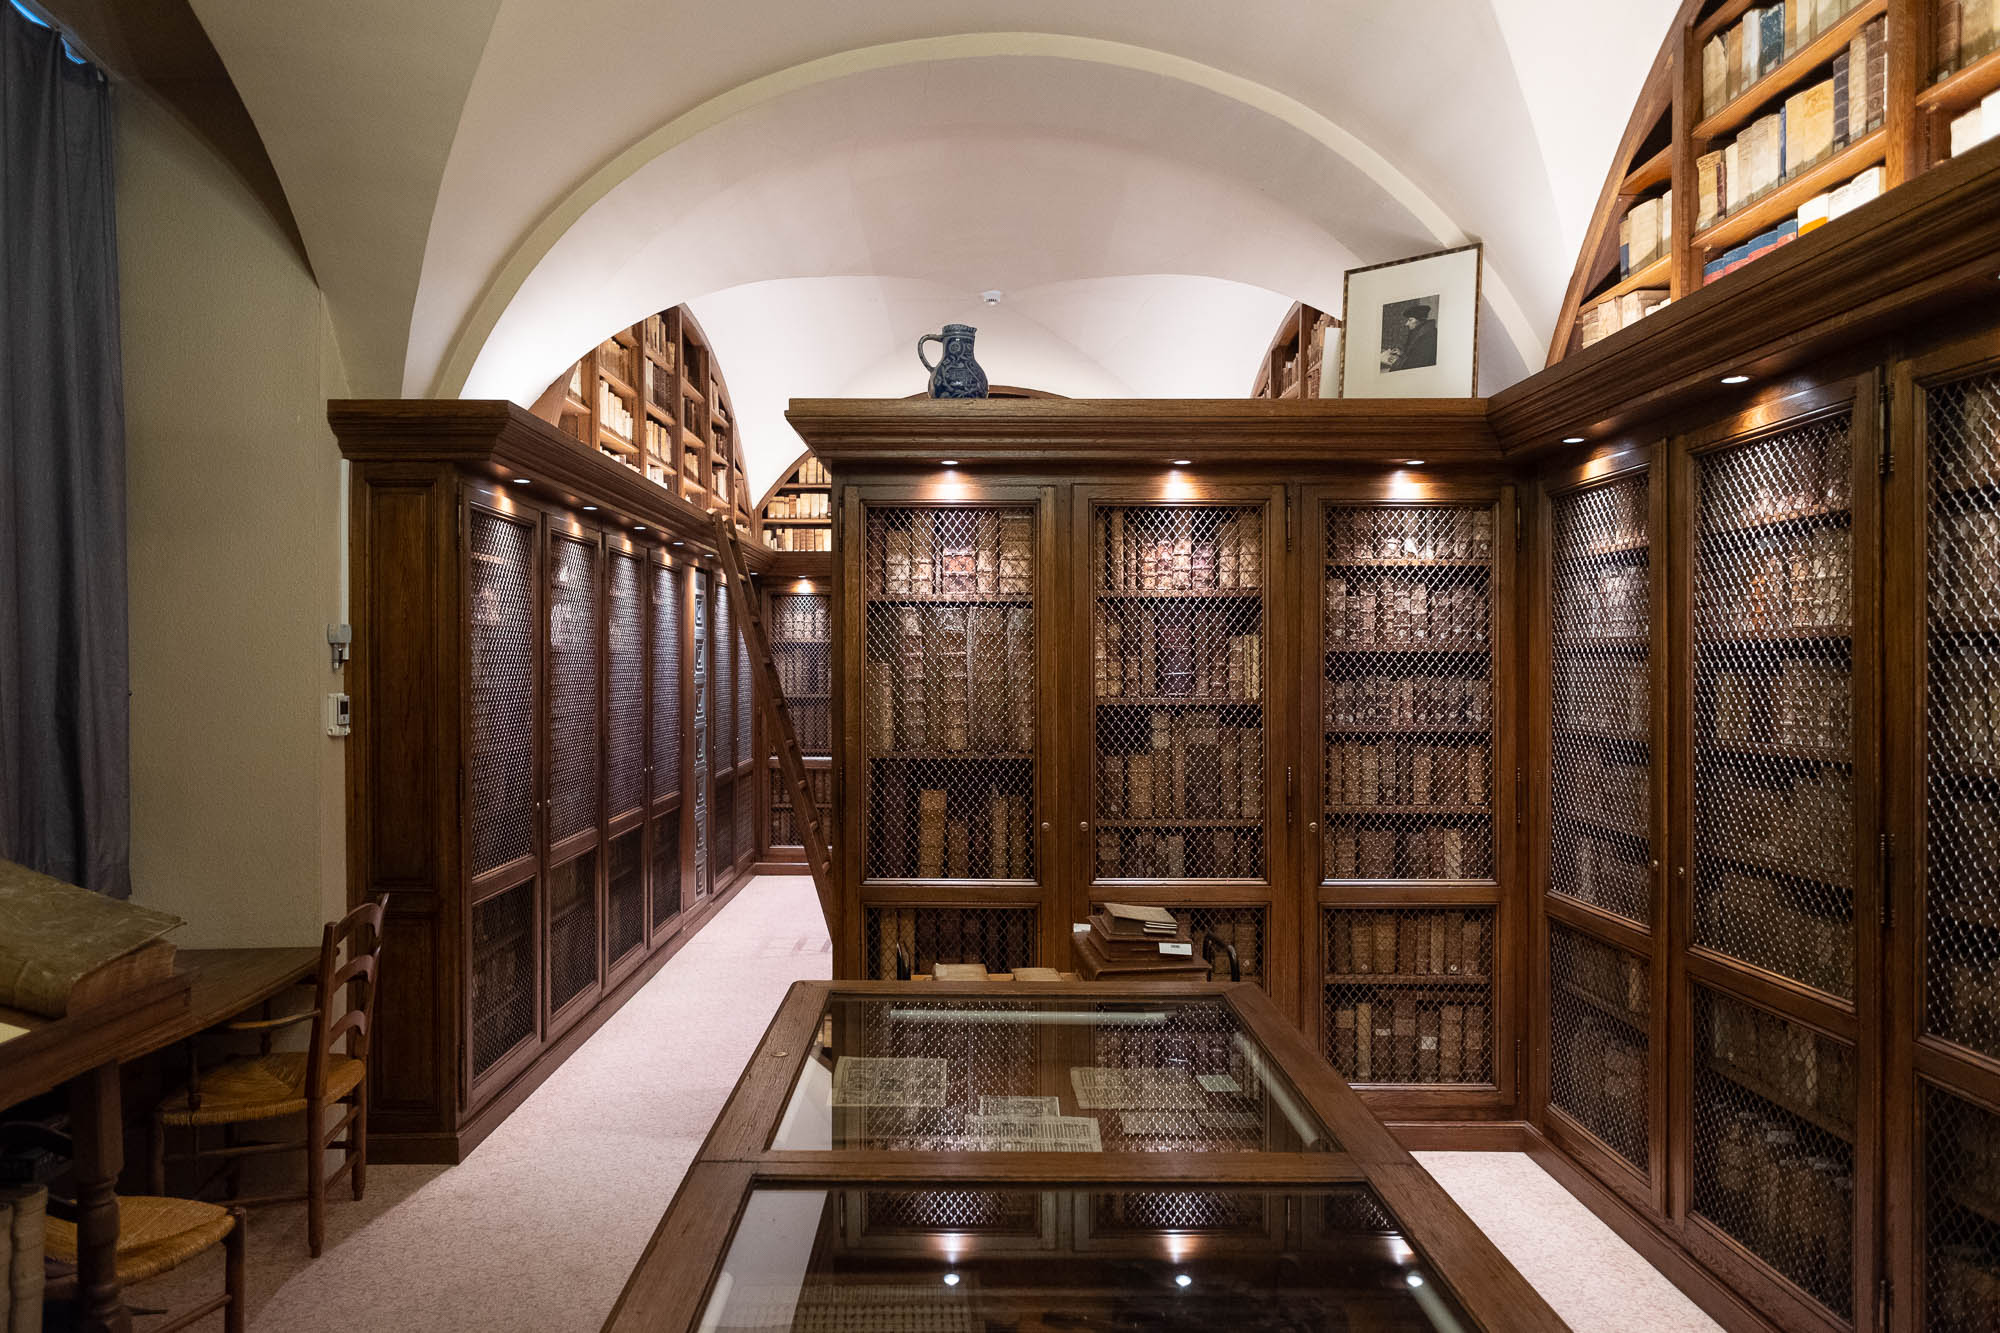 Interior of a rare book library with dark wood shelves filled with precious volumes behind protective netting. The shelves are rounded at the top to fit with the vaulted space. Glass-topped display cases are seen in the foreground.